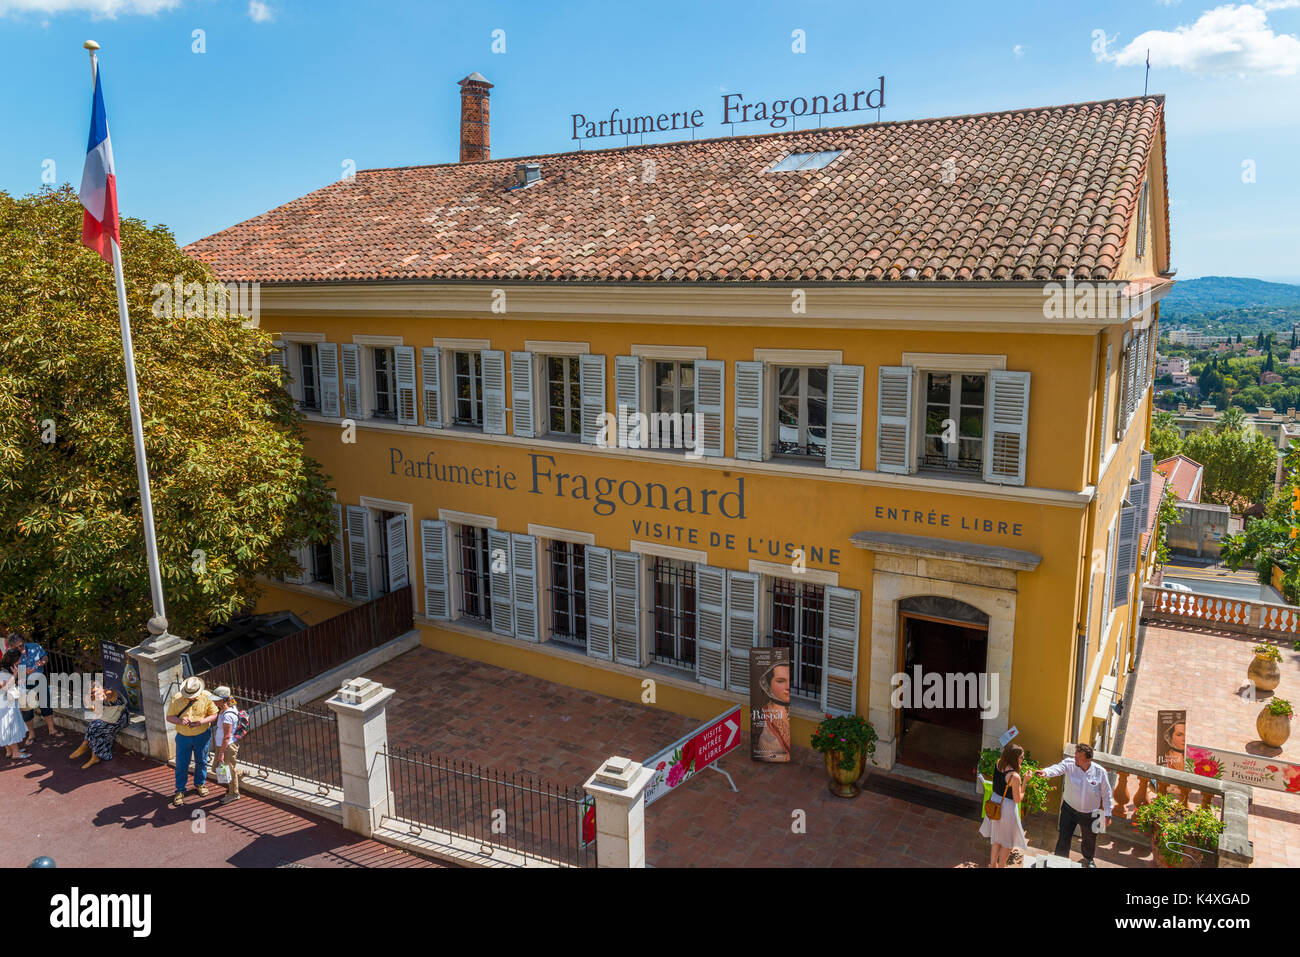 Fragonard perfume factory in Grasse Cote d'Azur, France. The city is ...